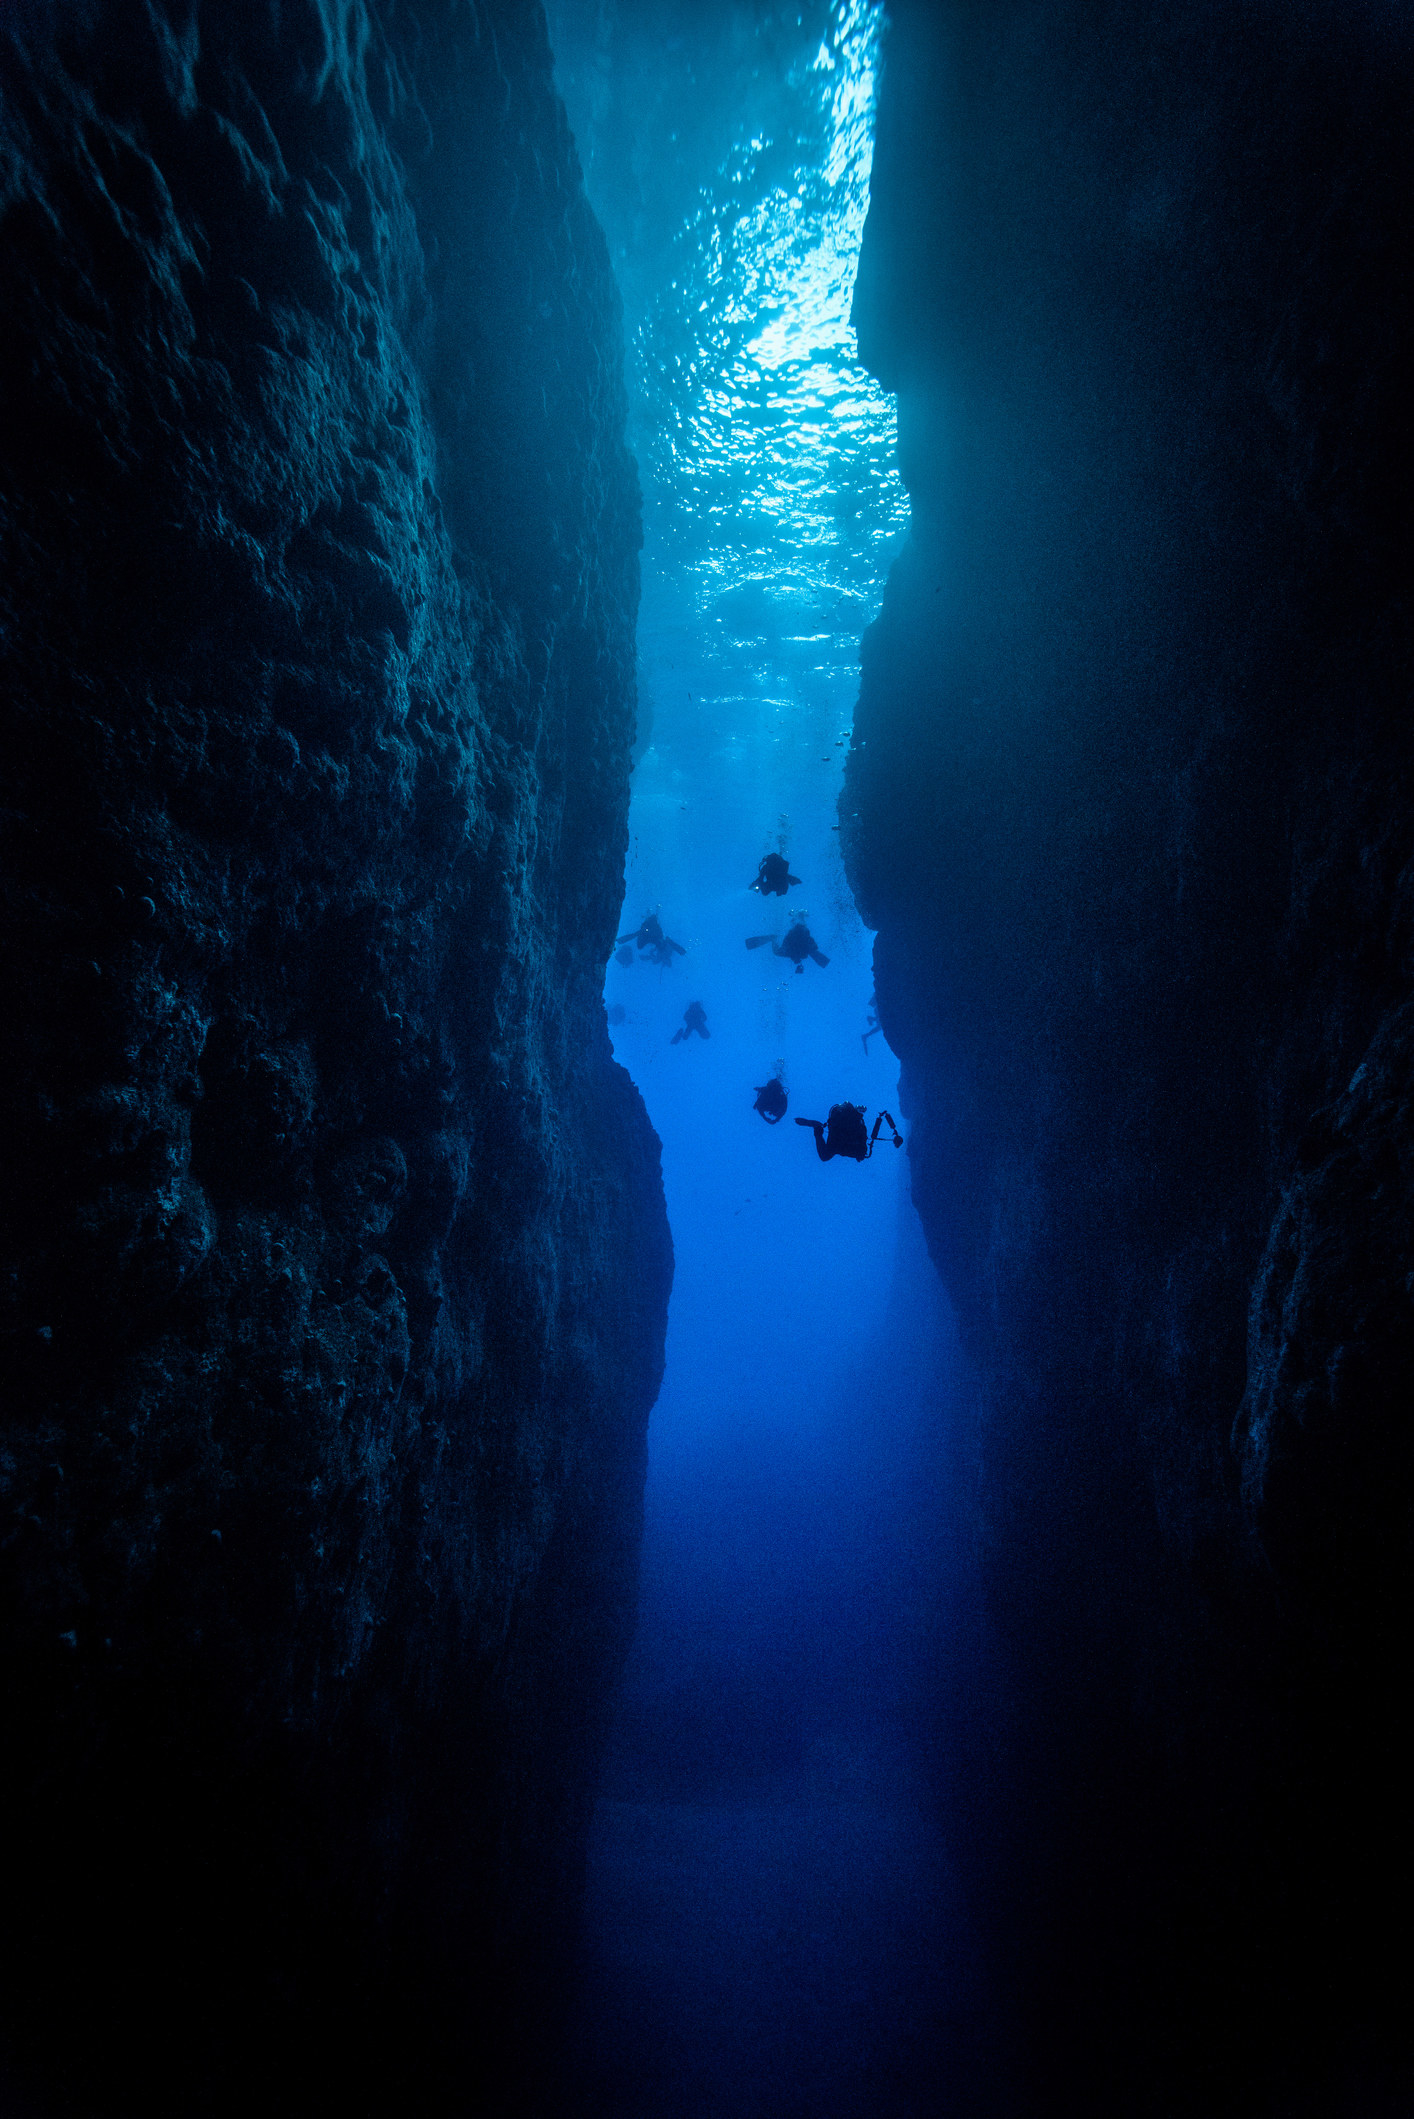 A diver diving into a dark underwater cave